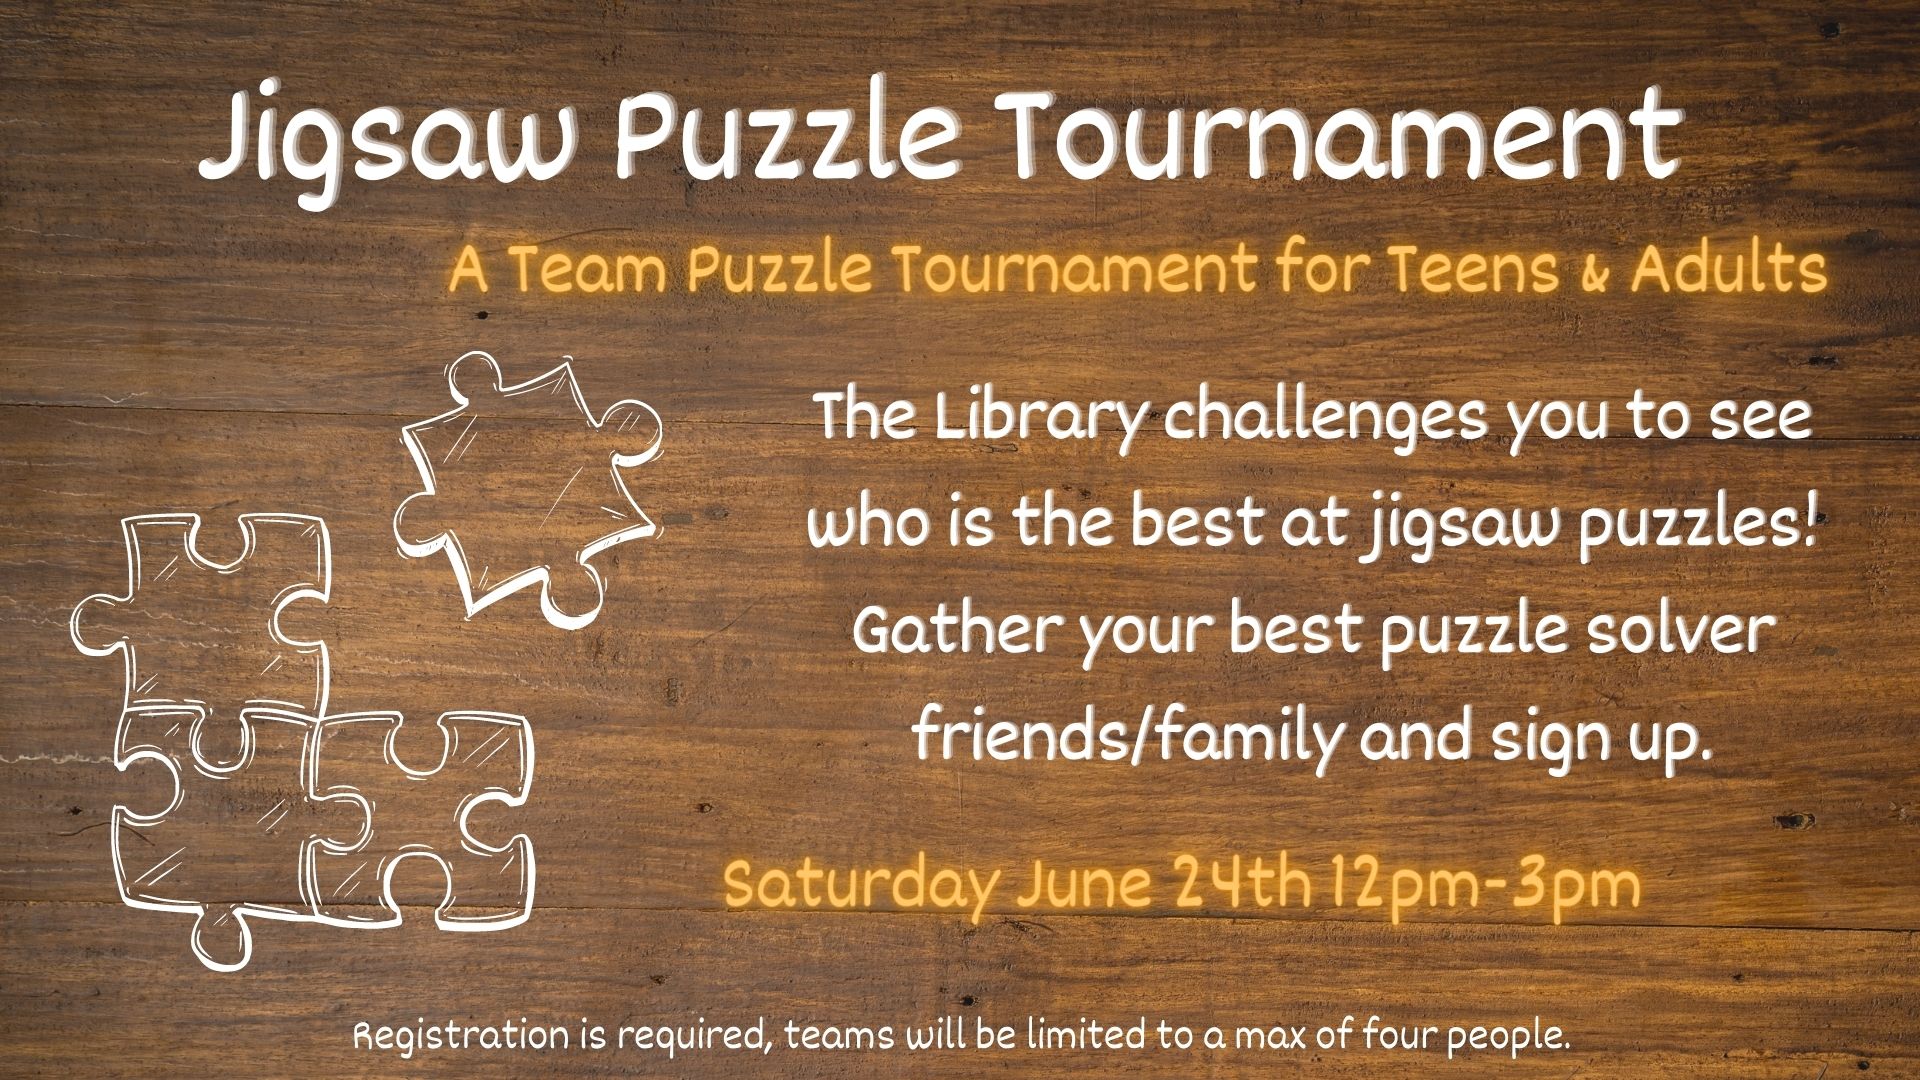 Flyer for Jigsaw Puzzle Tournament